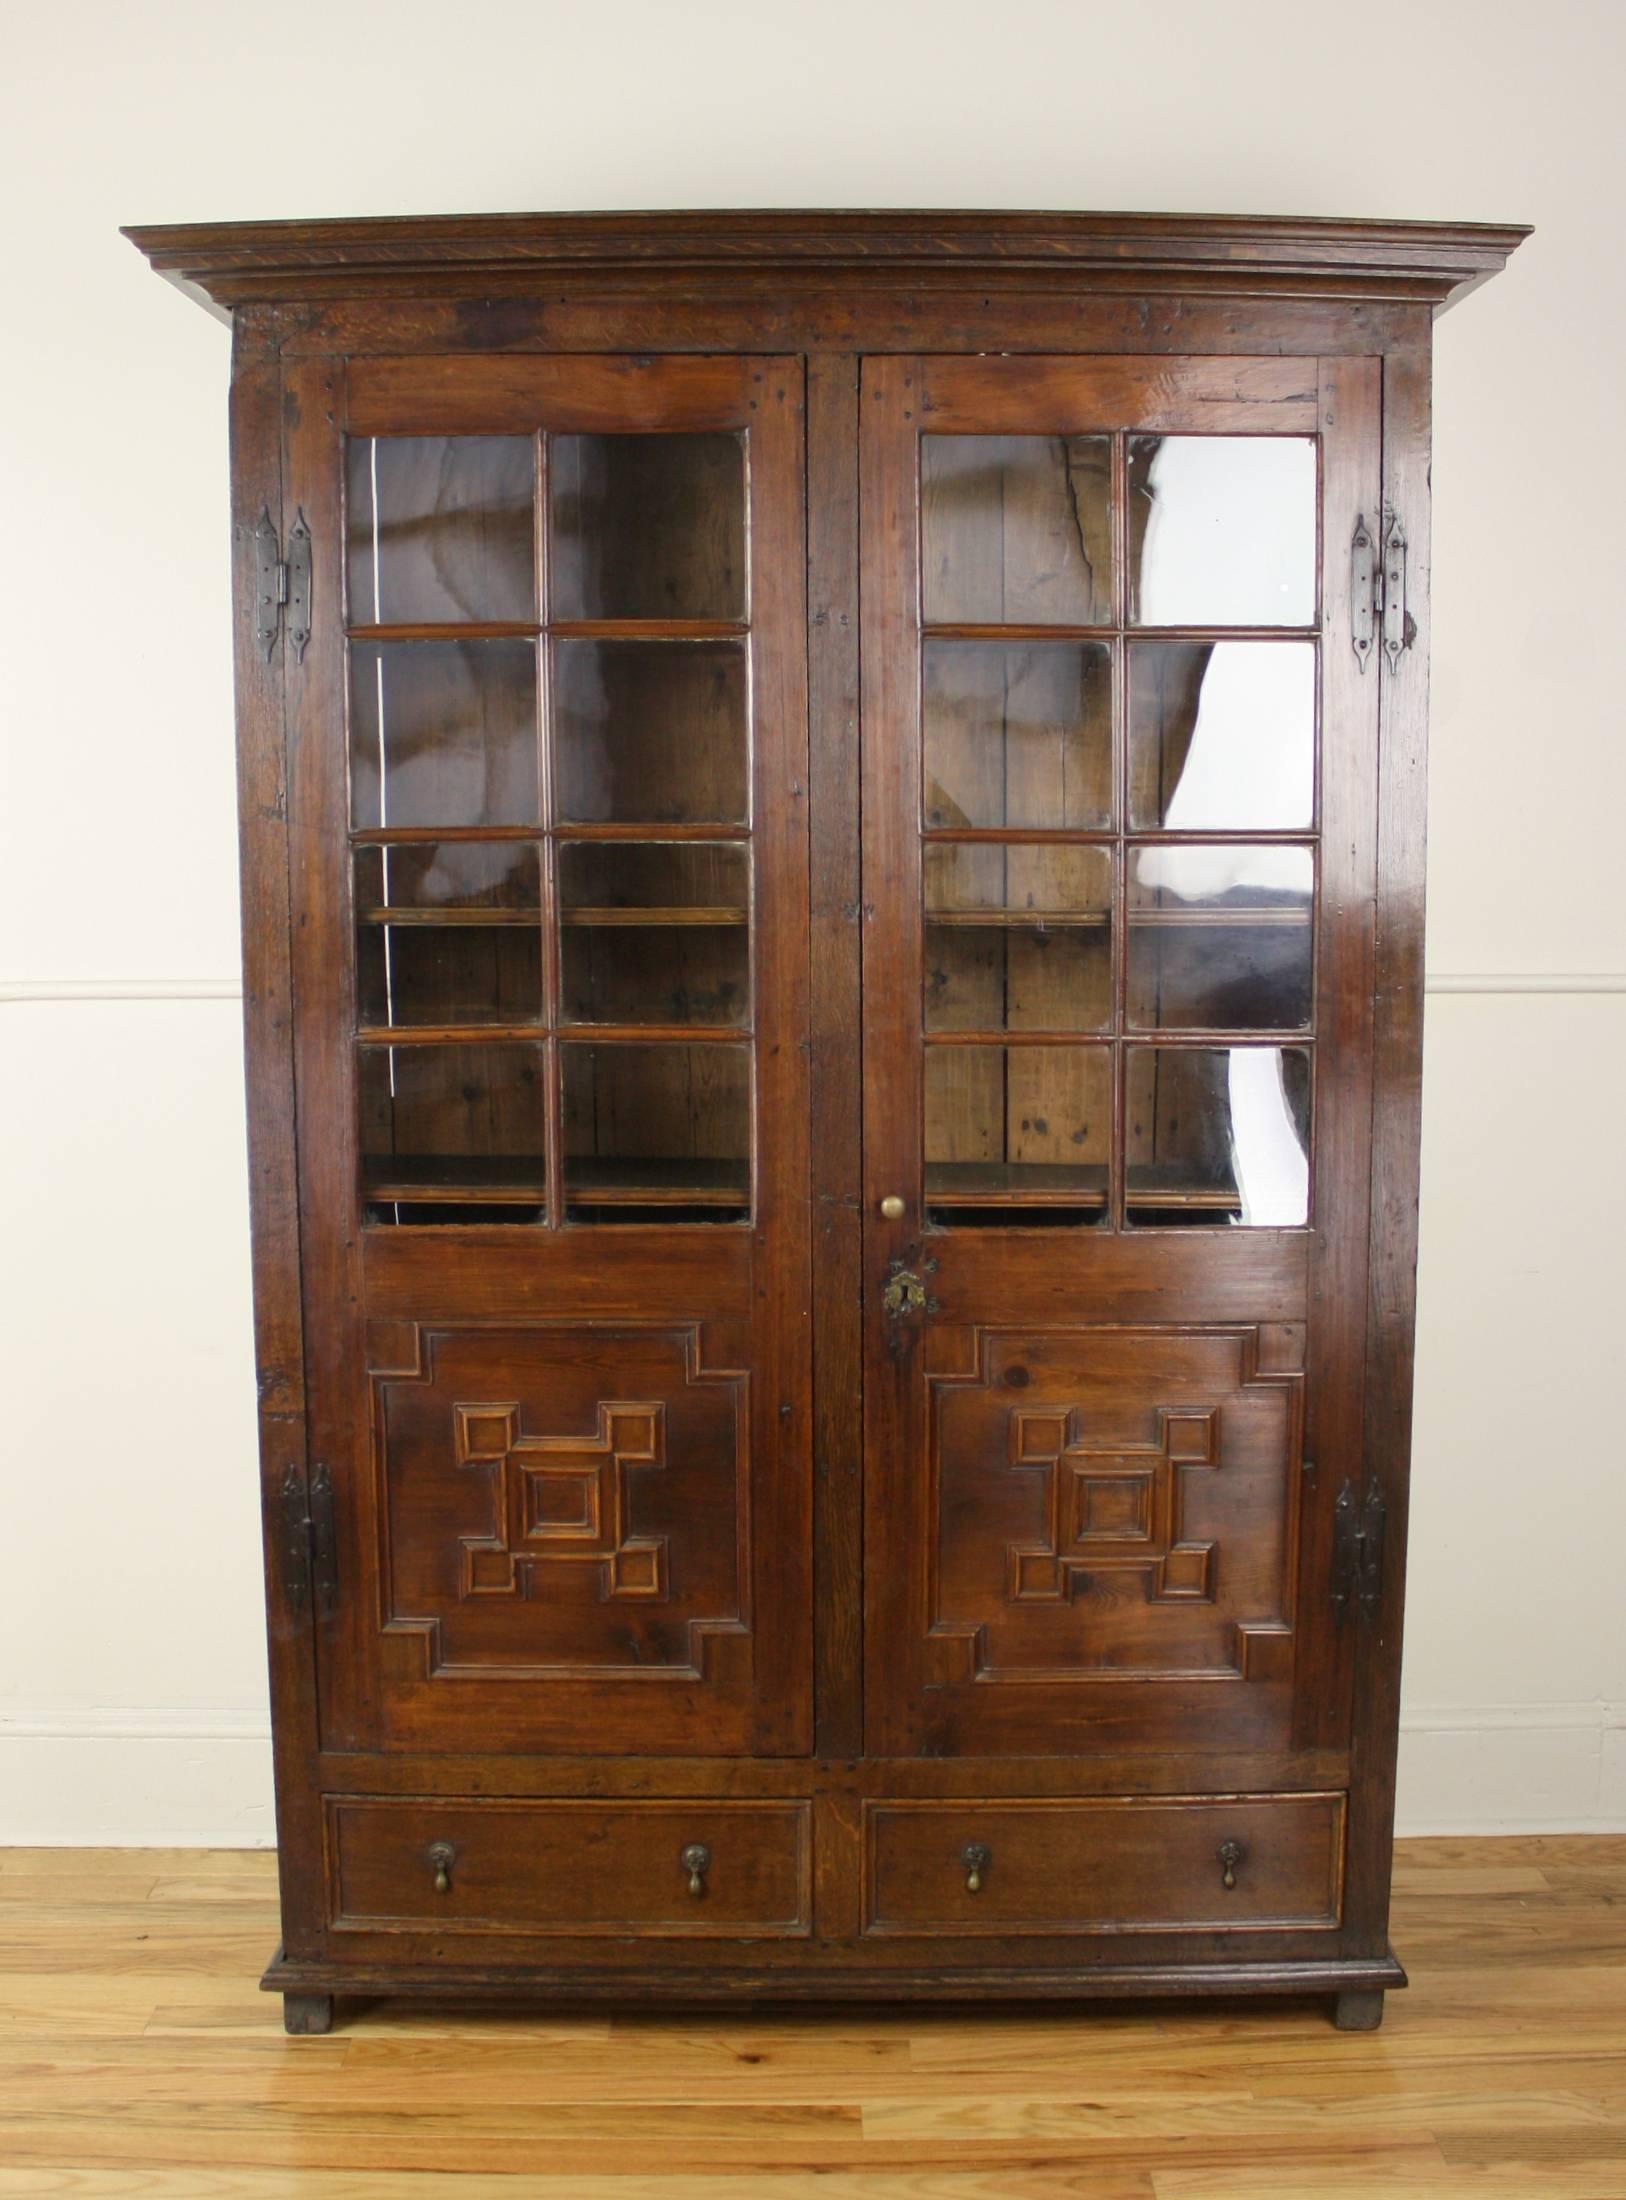 A splendid dark bookcase in fruitwood and oak, with original leaded glass panes. Handsome mouldings at top and bottom. The geometric pattern on the doors is quite modernistic despite the age of the piece, lending it a timeless quality. Five shelves